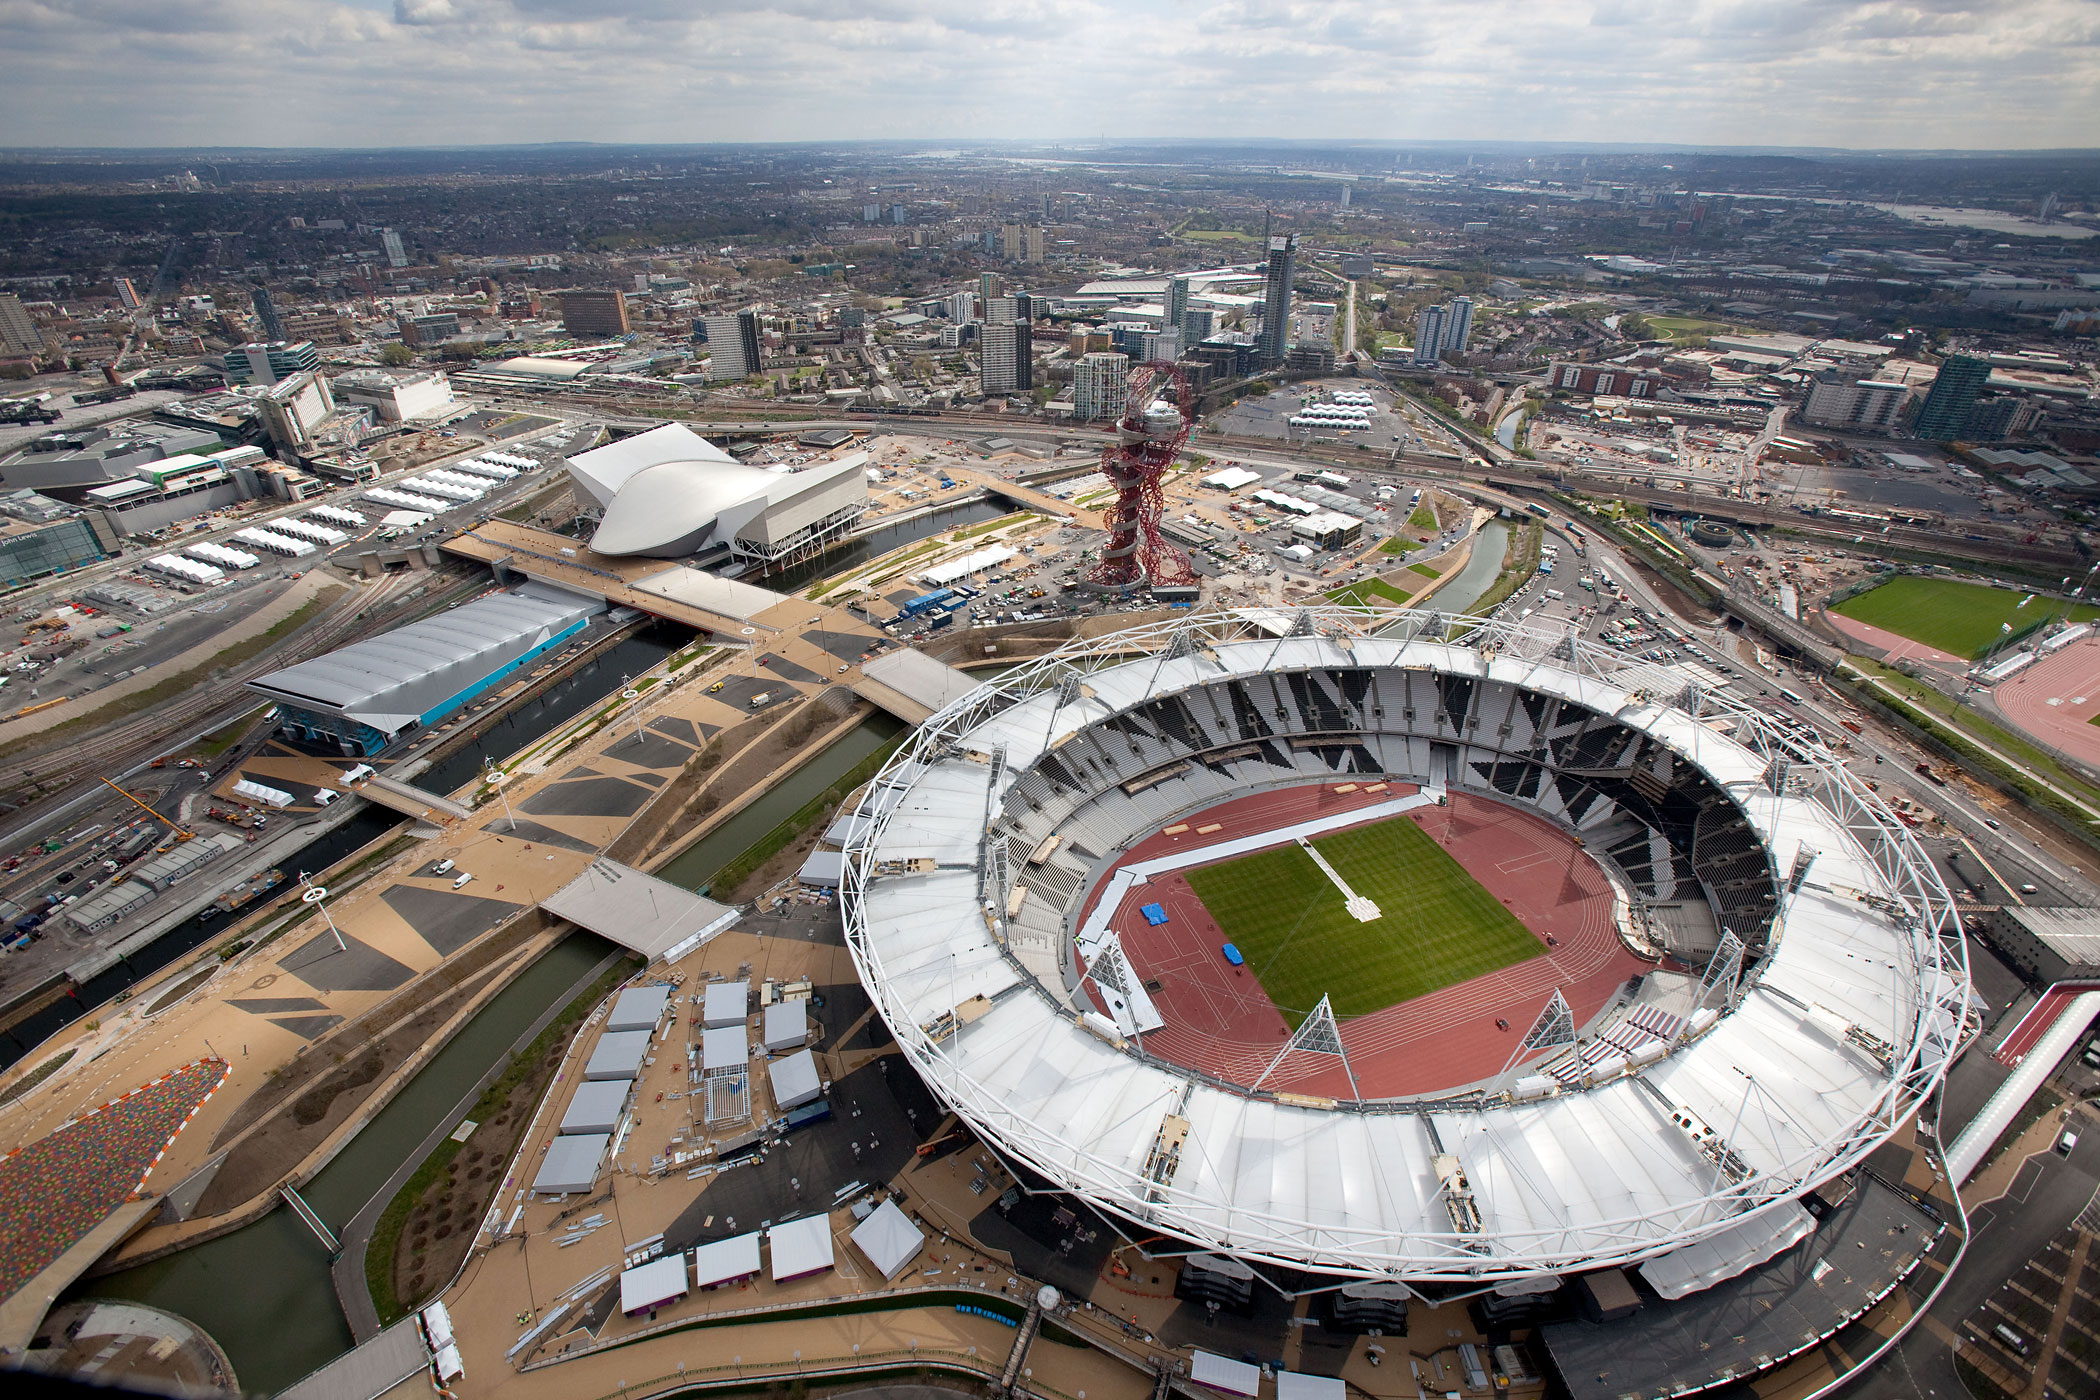 An aerial view of the Olympic Stadium, Aquatics Centre and Water Polo Centre in the London 2012 Olympic Park on April 16, 2012 in London, England. (Anthony Charlton—LOCOG/Getty Images)